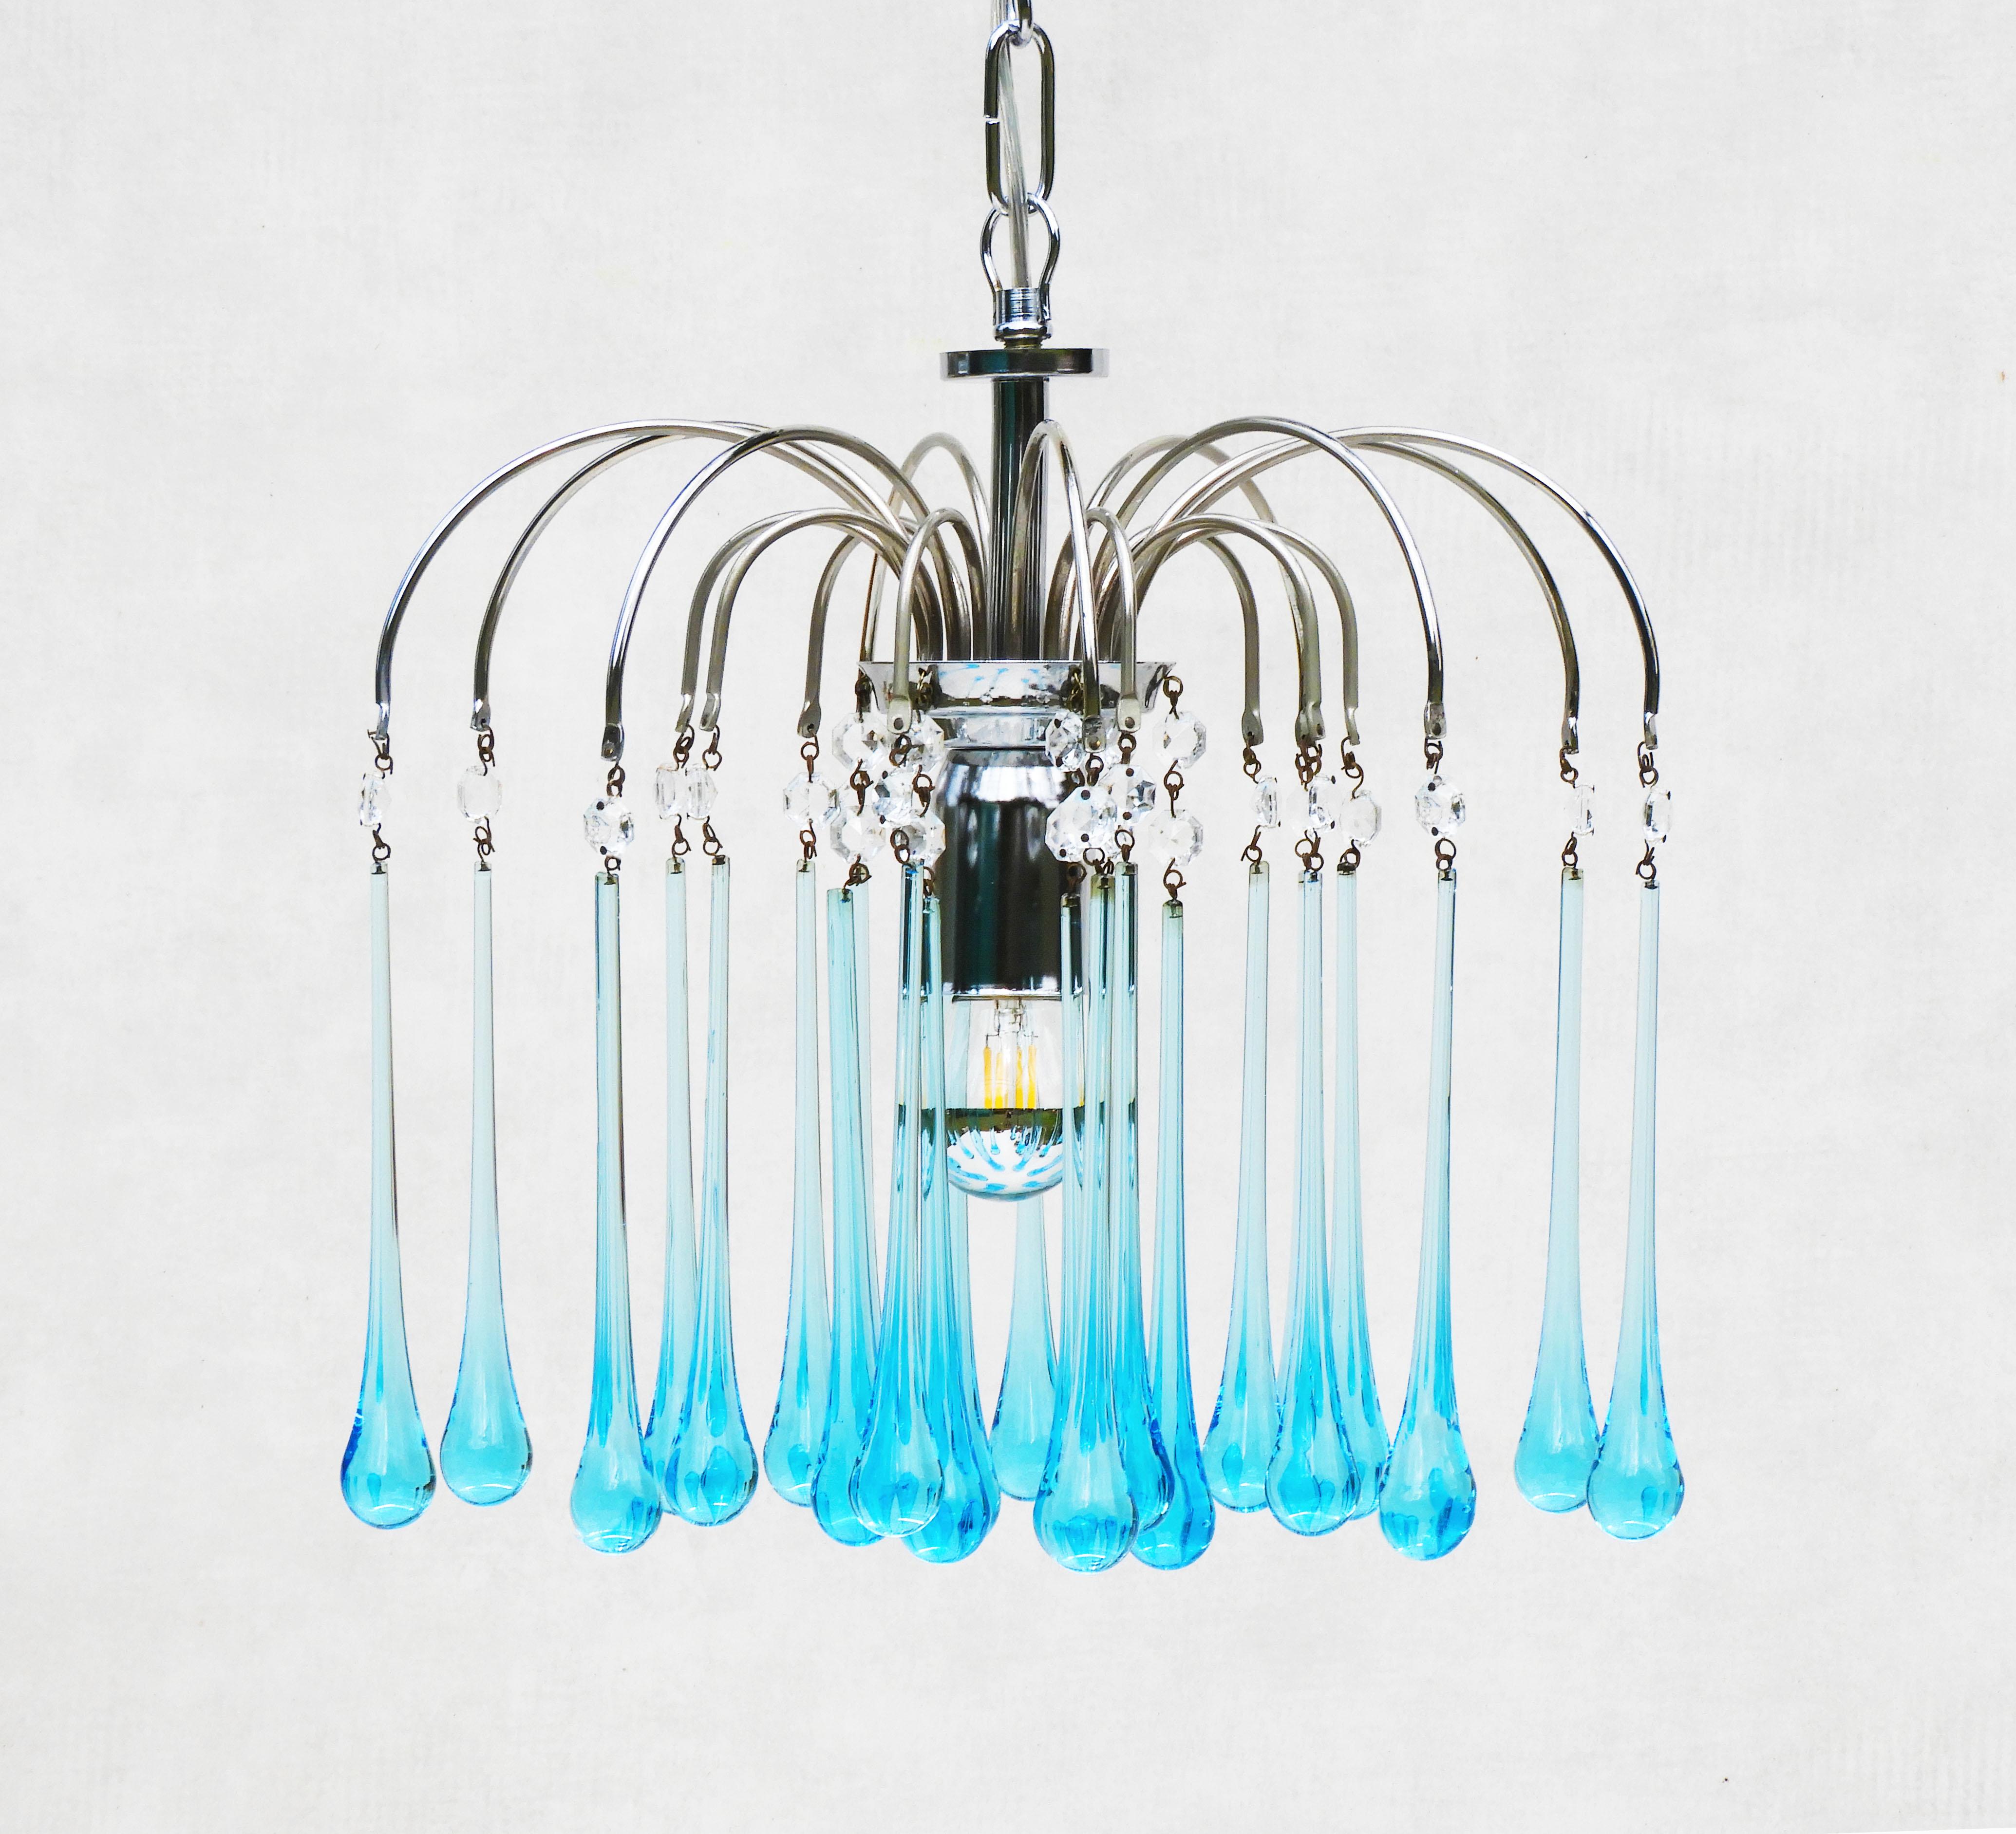 Stunning Paulo Venini Style waterfall pendant chandelier.
Beautiful Murano glass cascade pendant light, 24 blue ‘teardrop’ crystals on a three-tier chrome frame.
In great vintage condition with good patina and no losses to glass. Completely